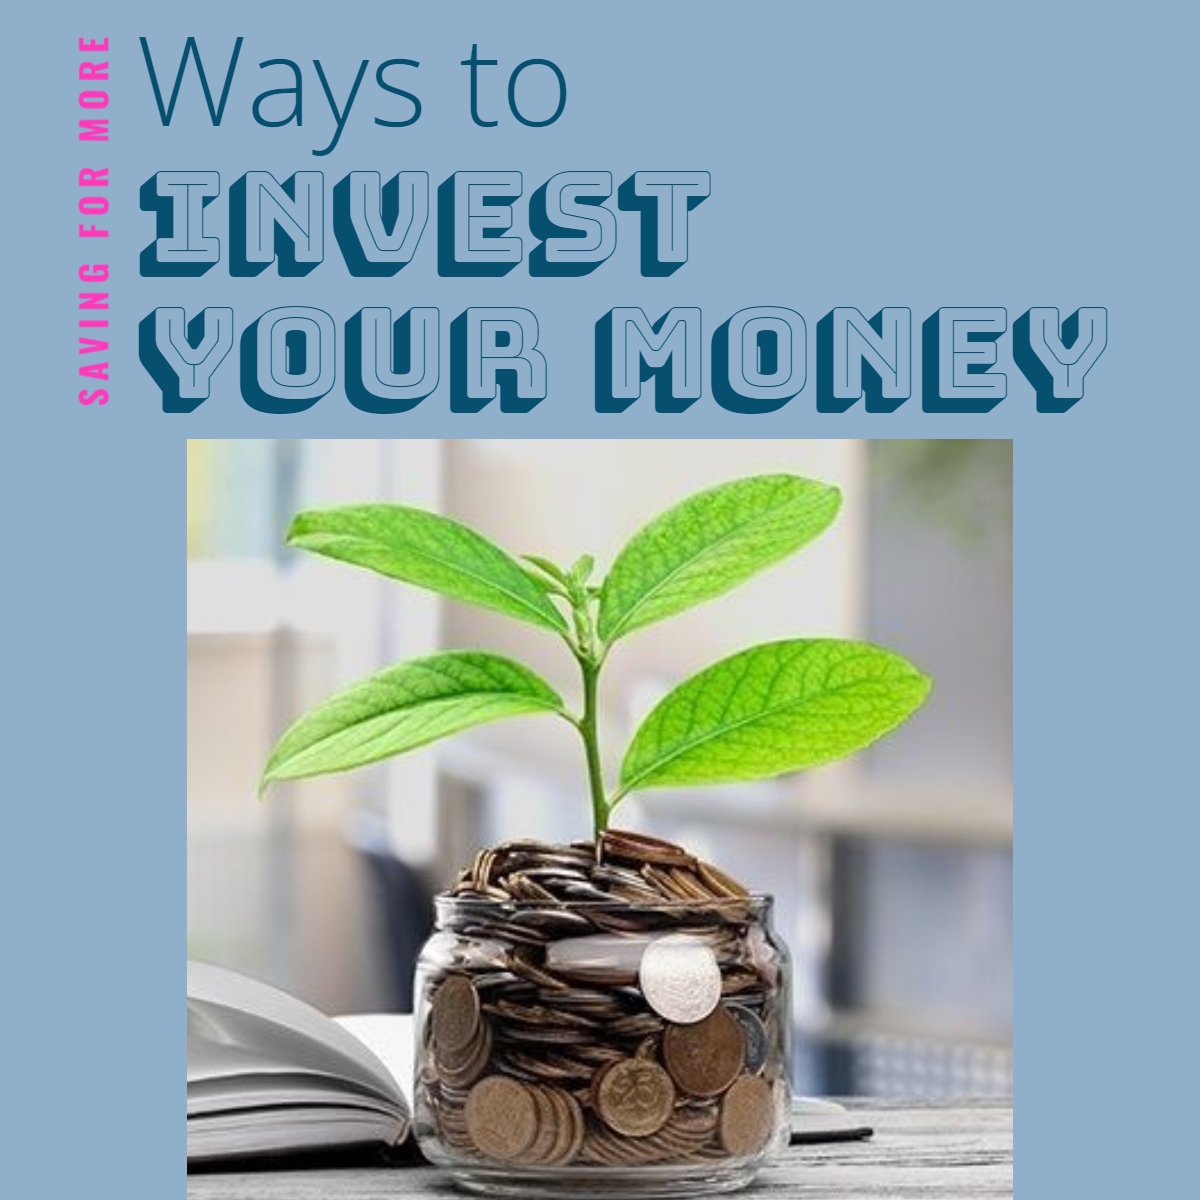 Ways to Invest Your Money